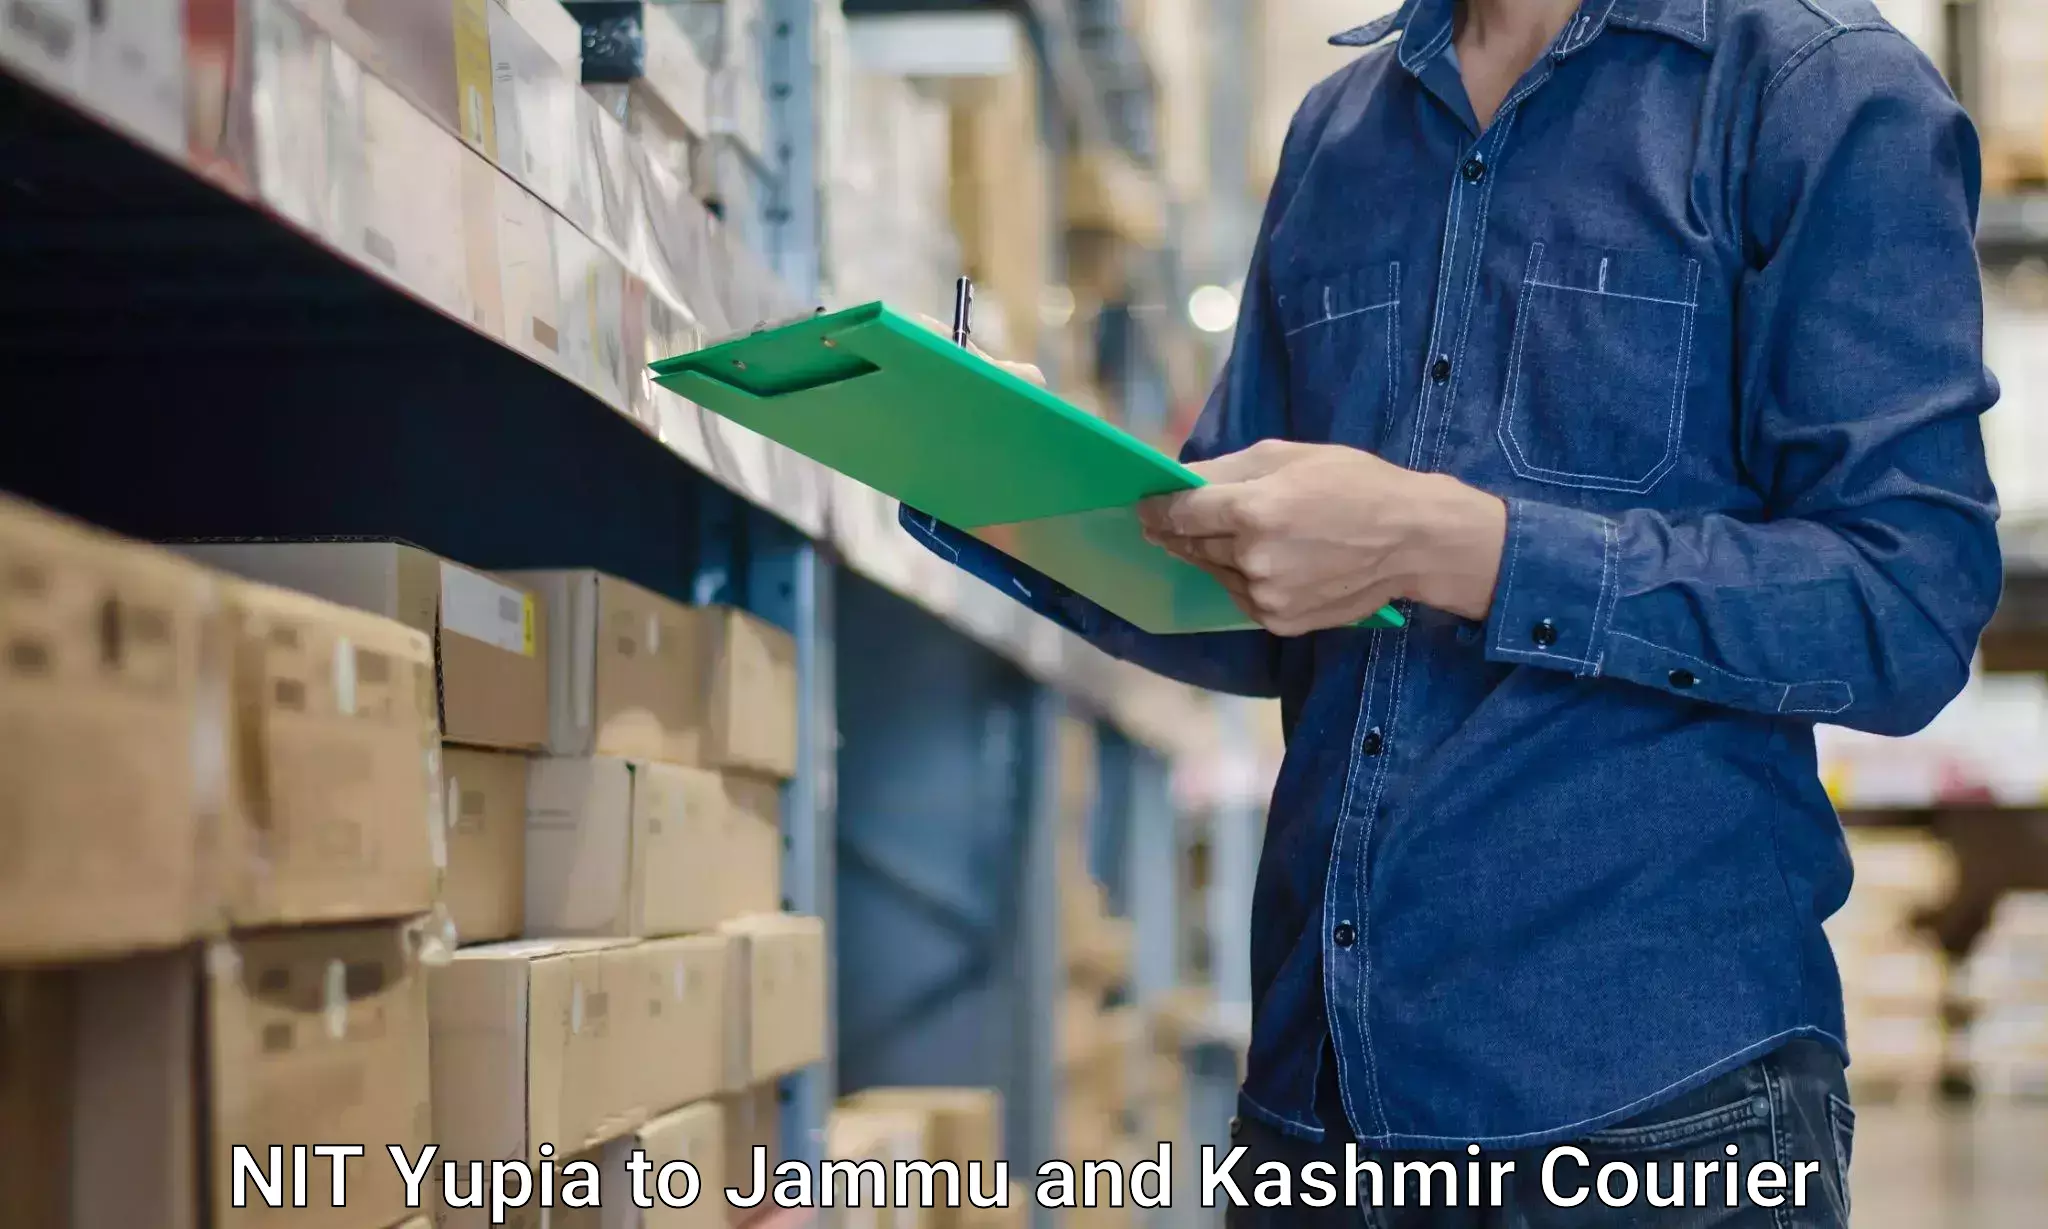 Furniture delivery service NIT Yupia to Jammu and Kashmir